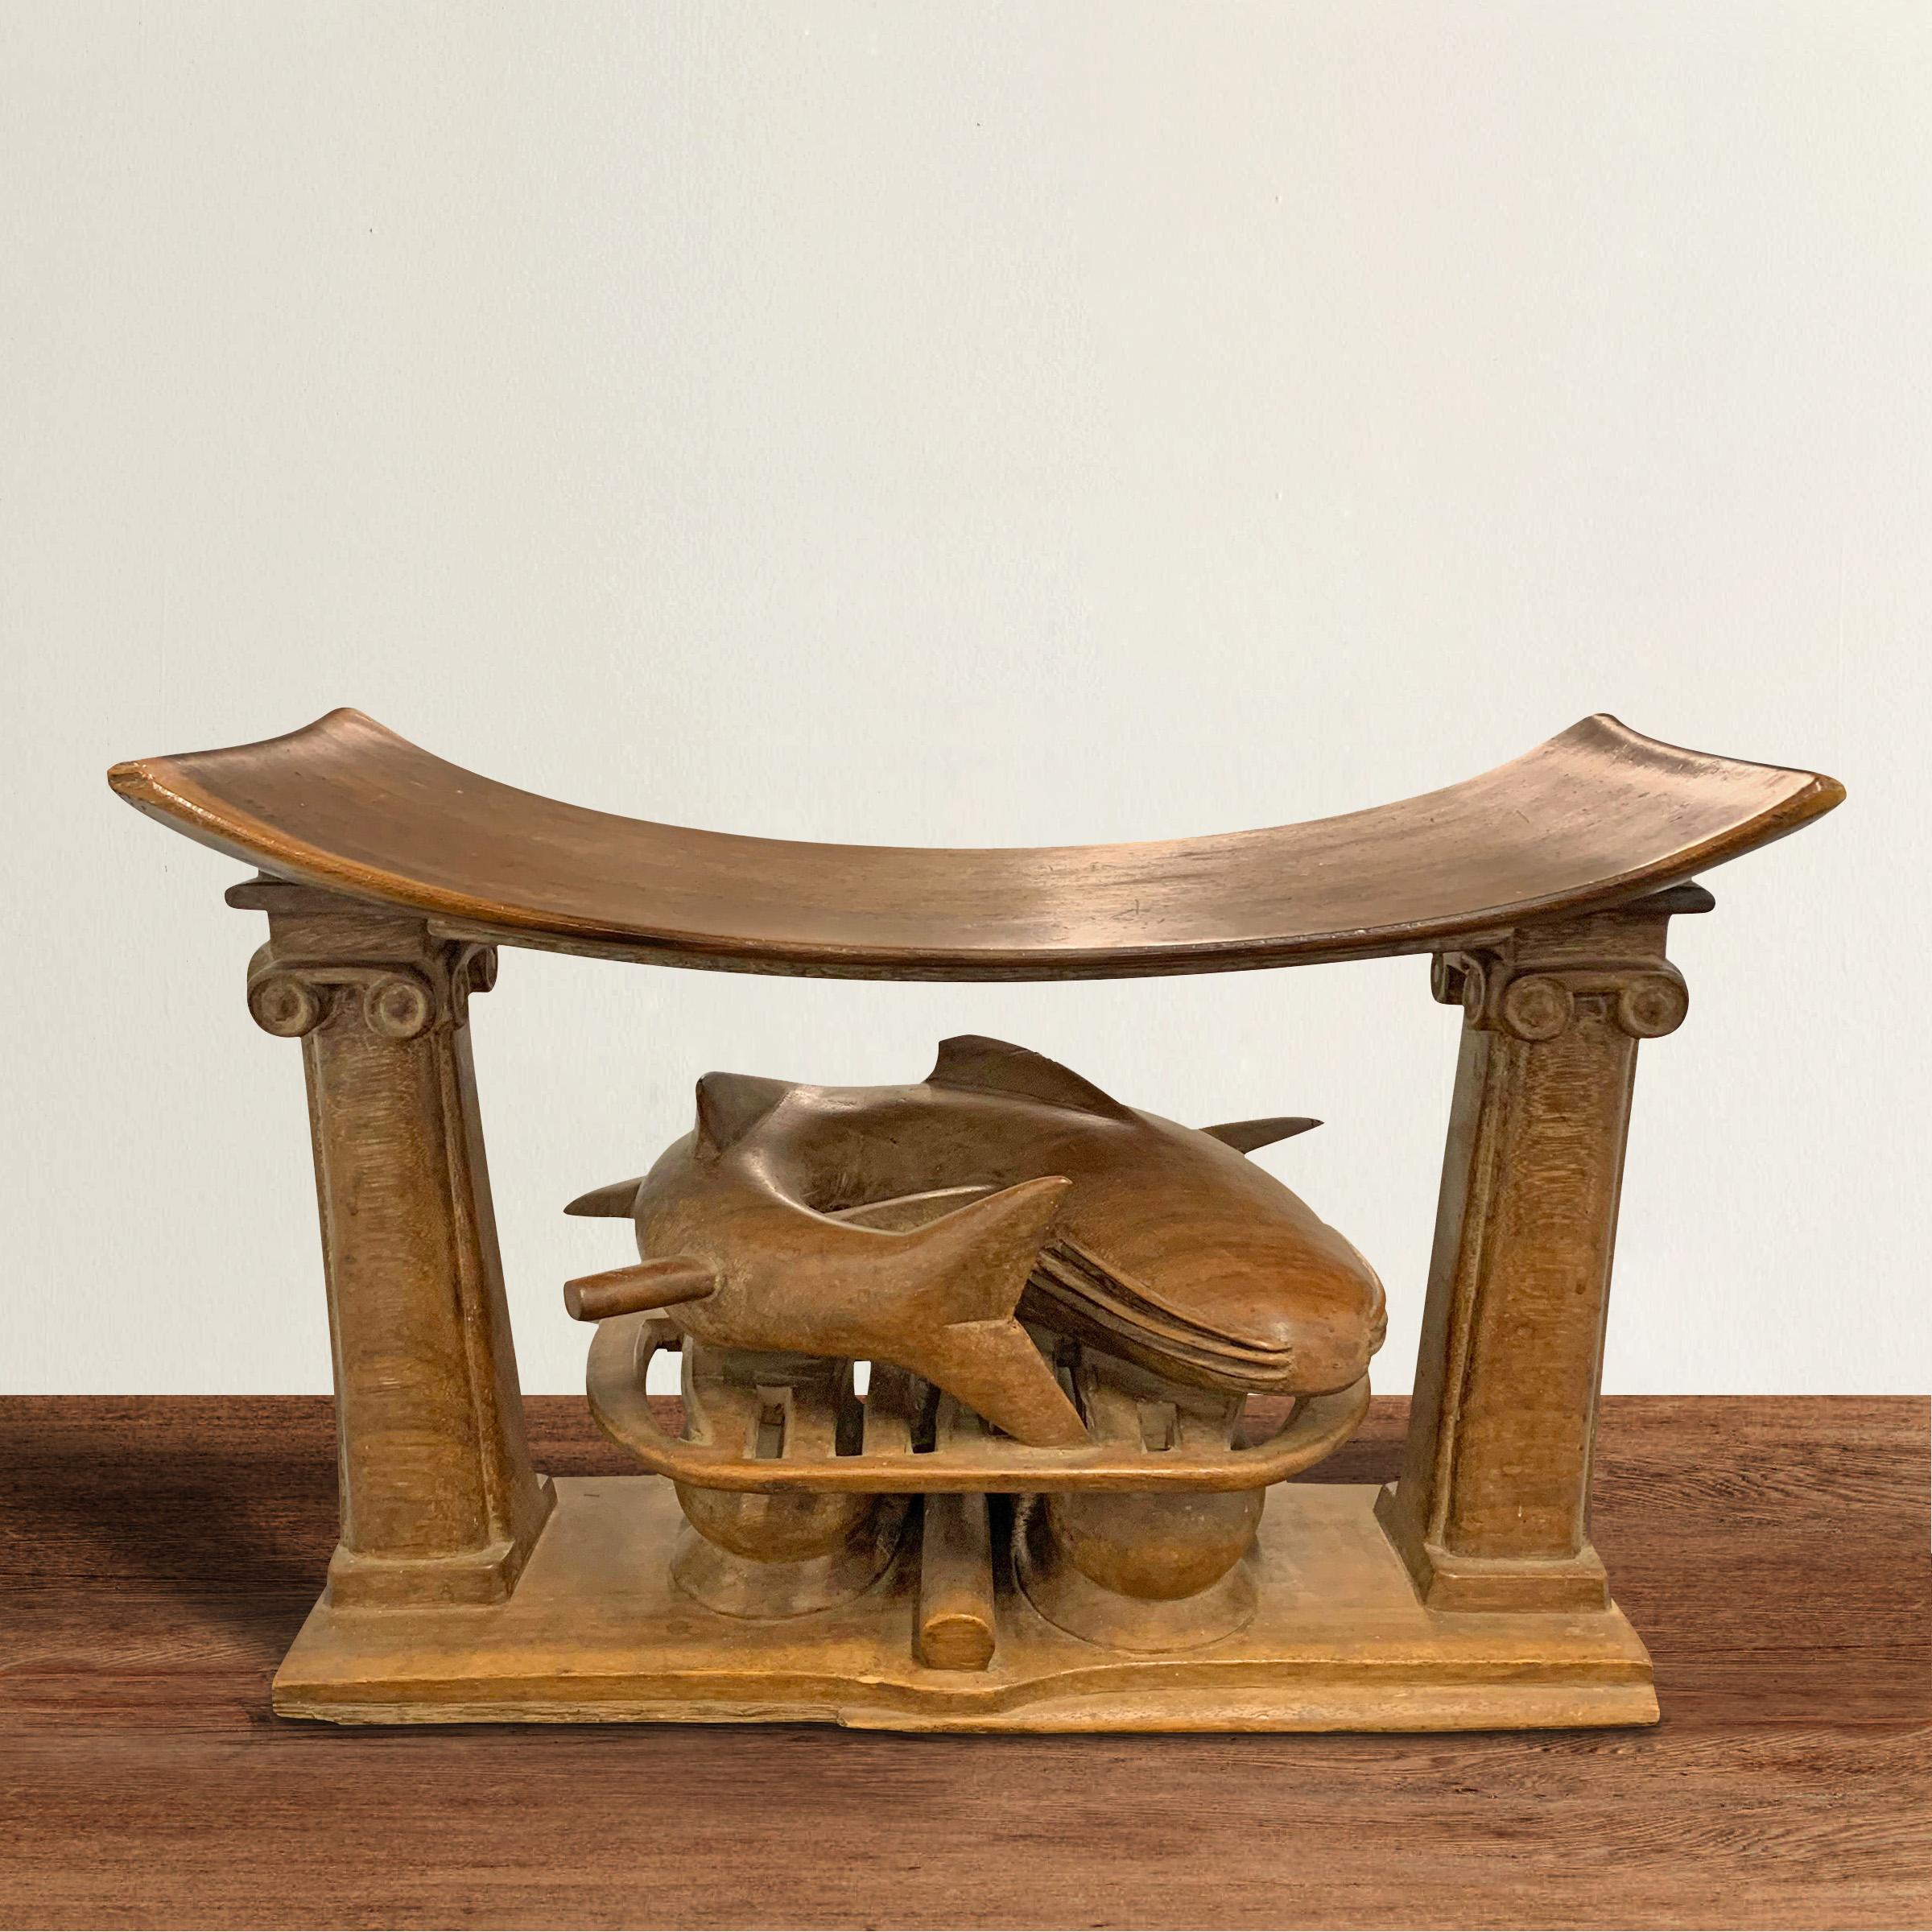 A unique Asante stool depicting a speared catfish on a grill resting under a a curved seat supported by square ionic columns, and all carved of one piece of wood.